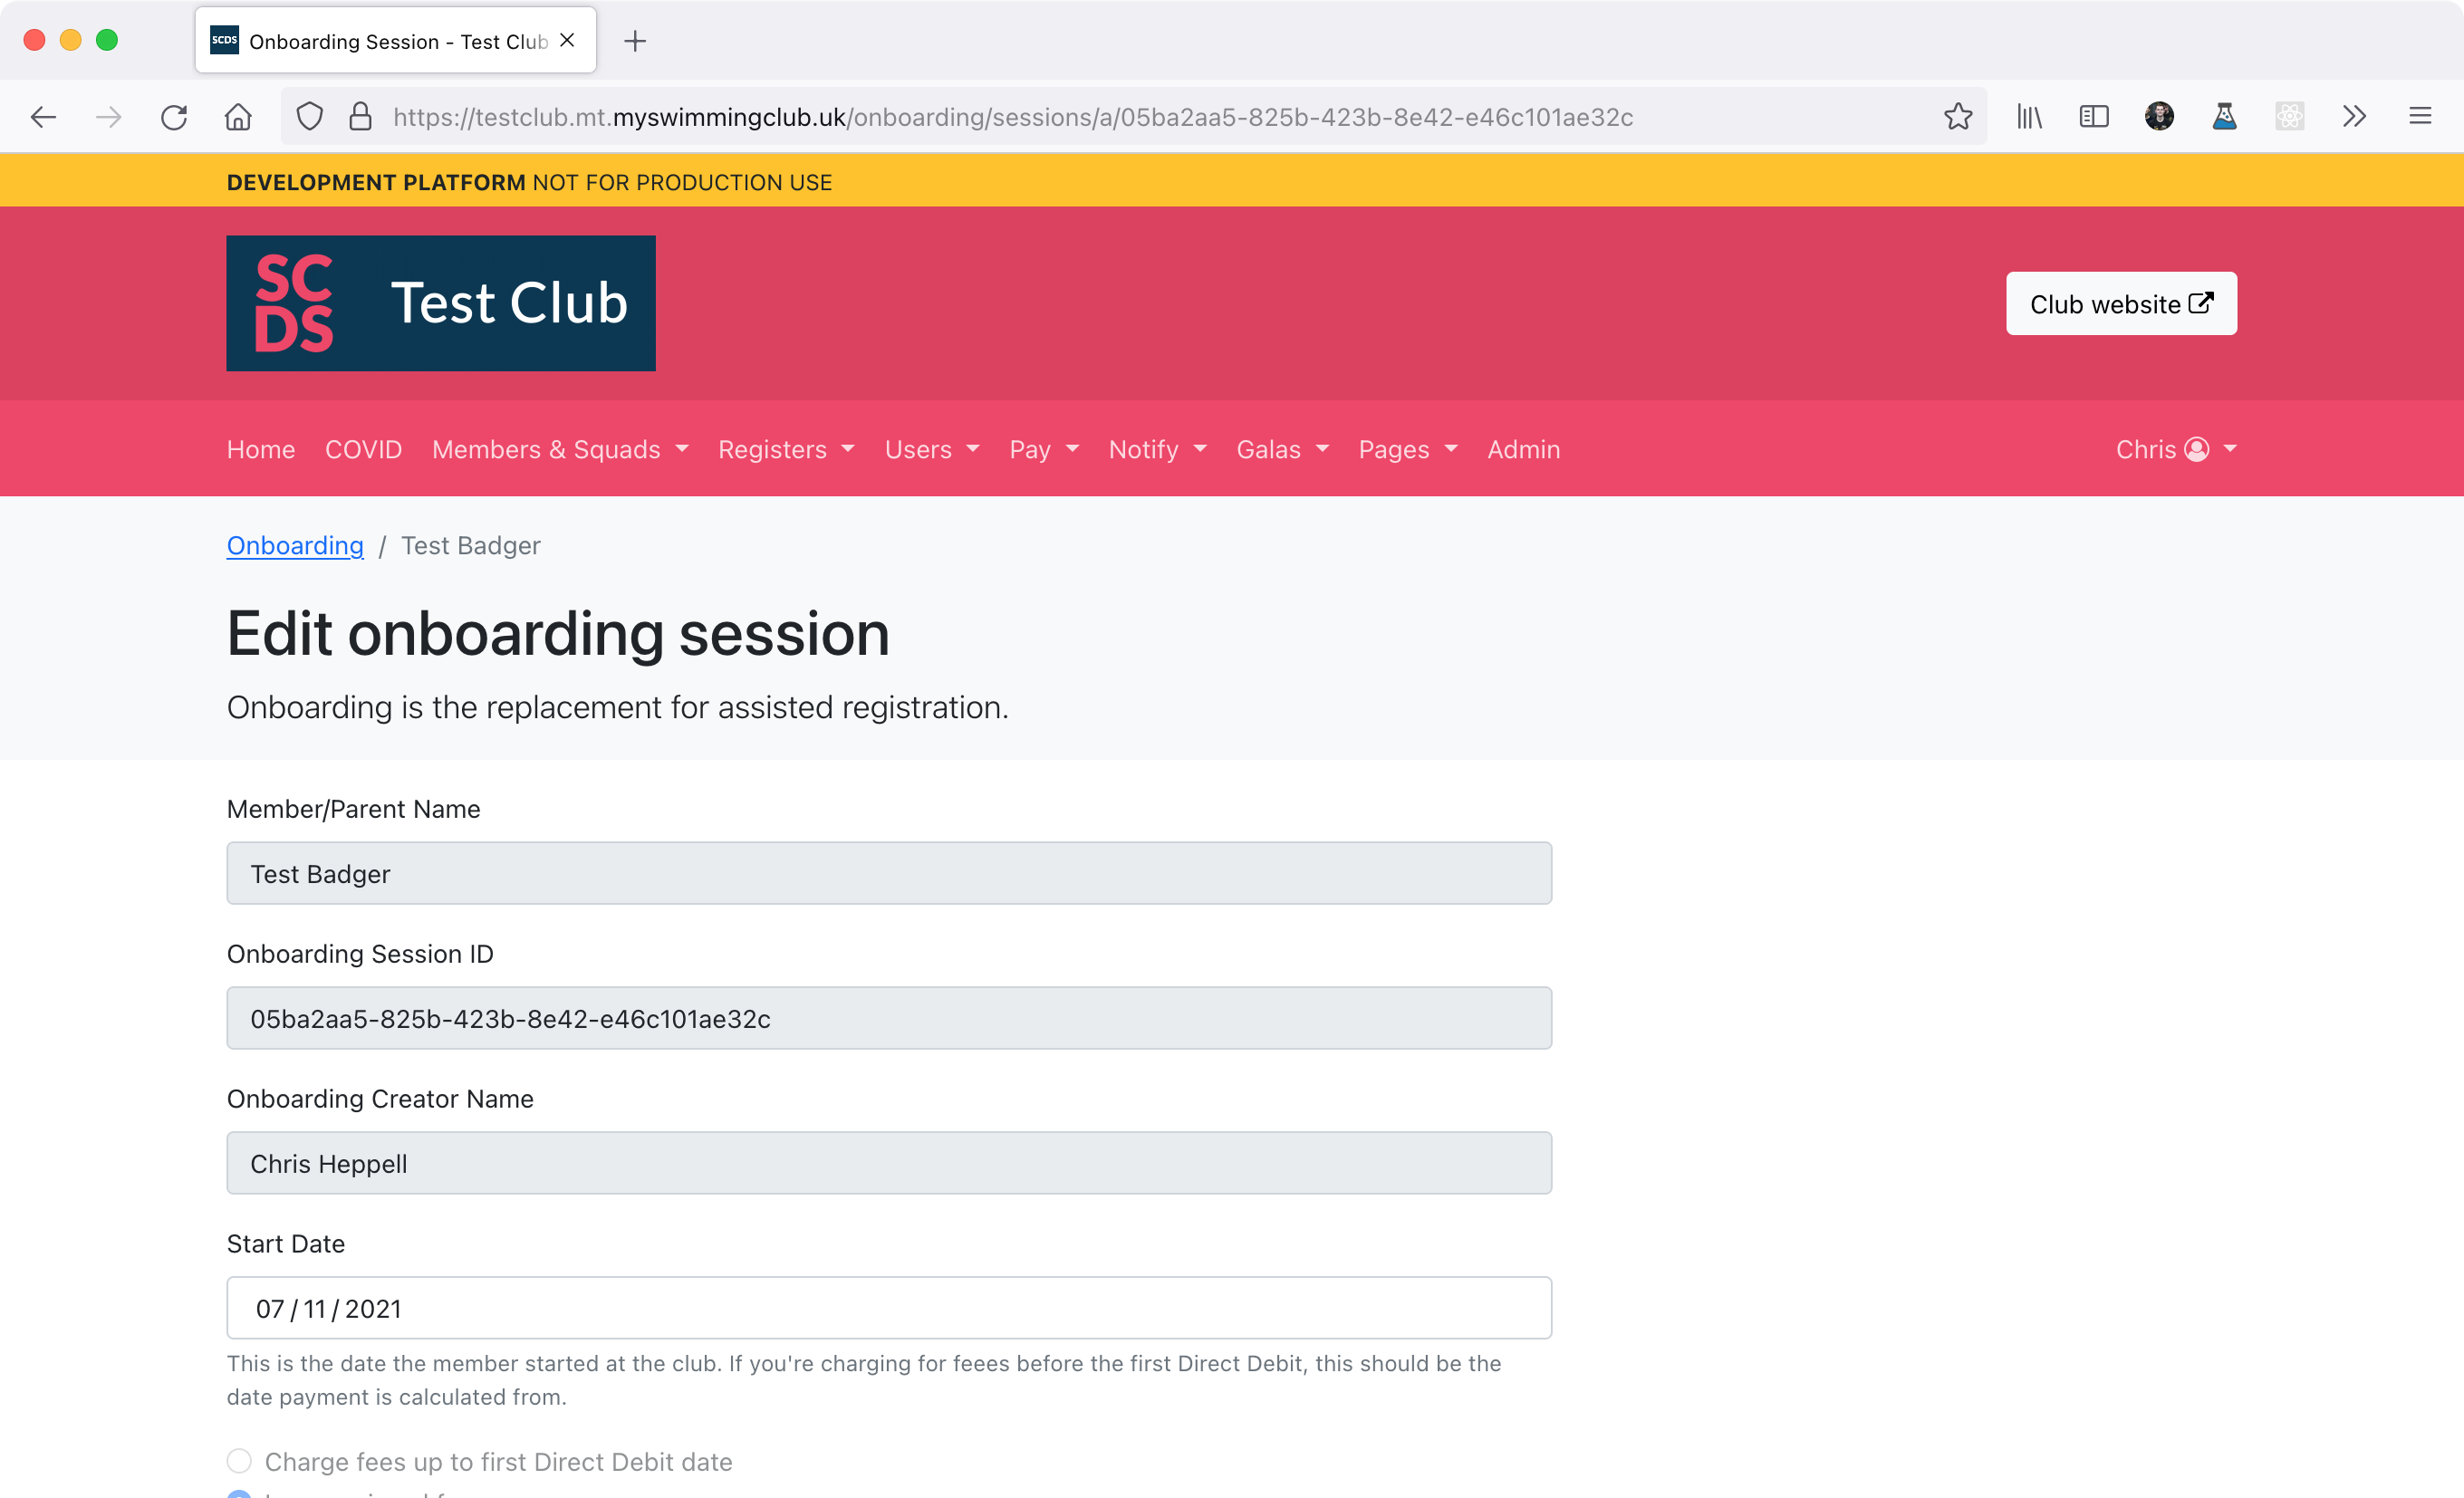 Screenshot of onboarding session information page